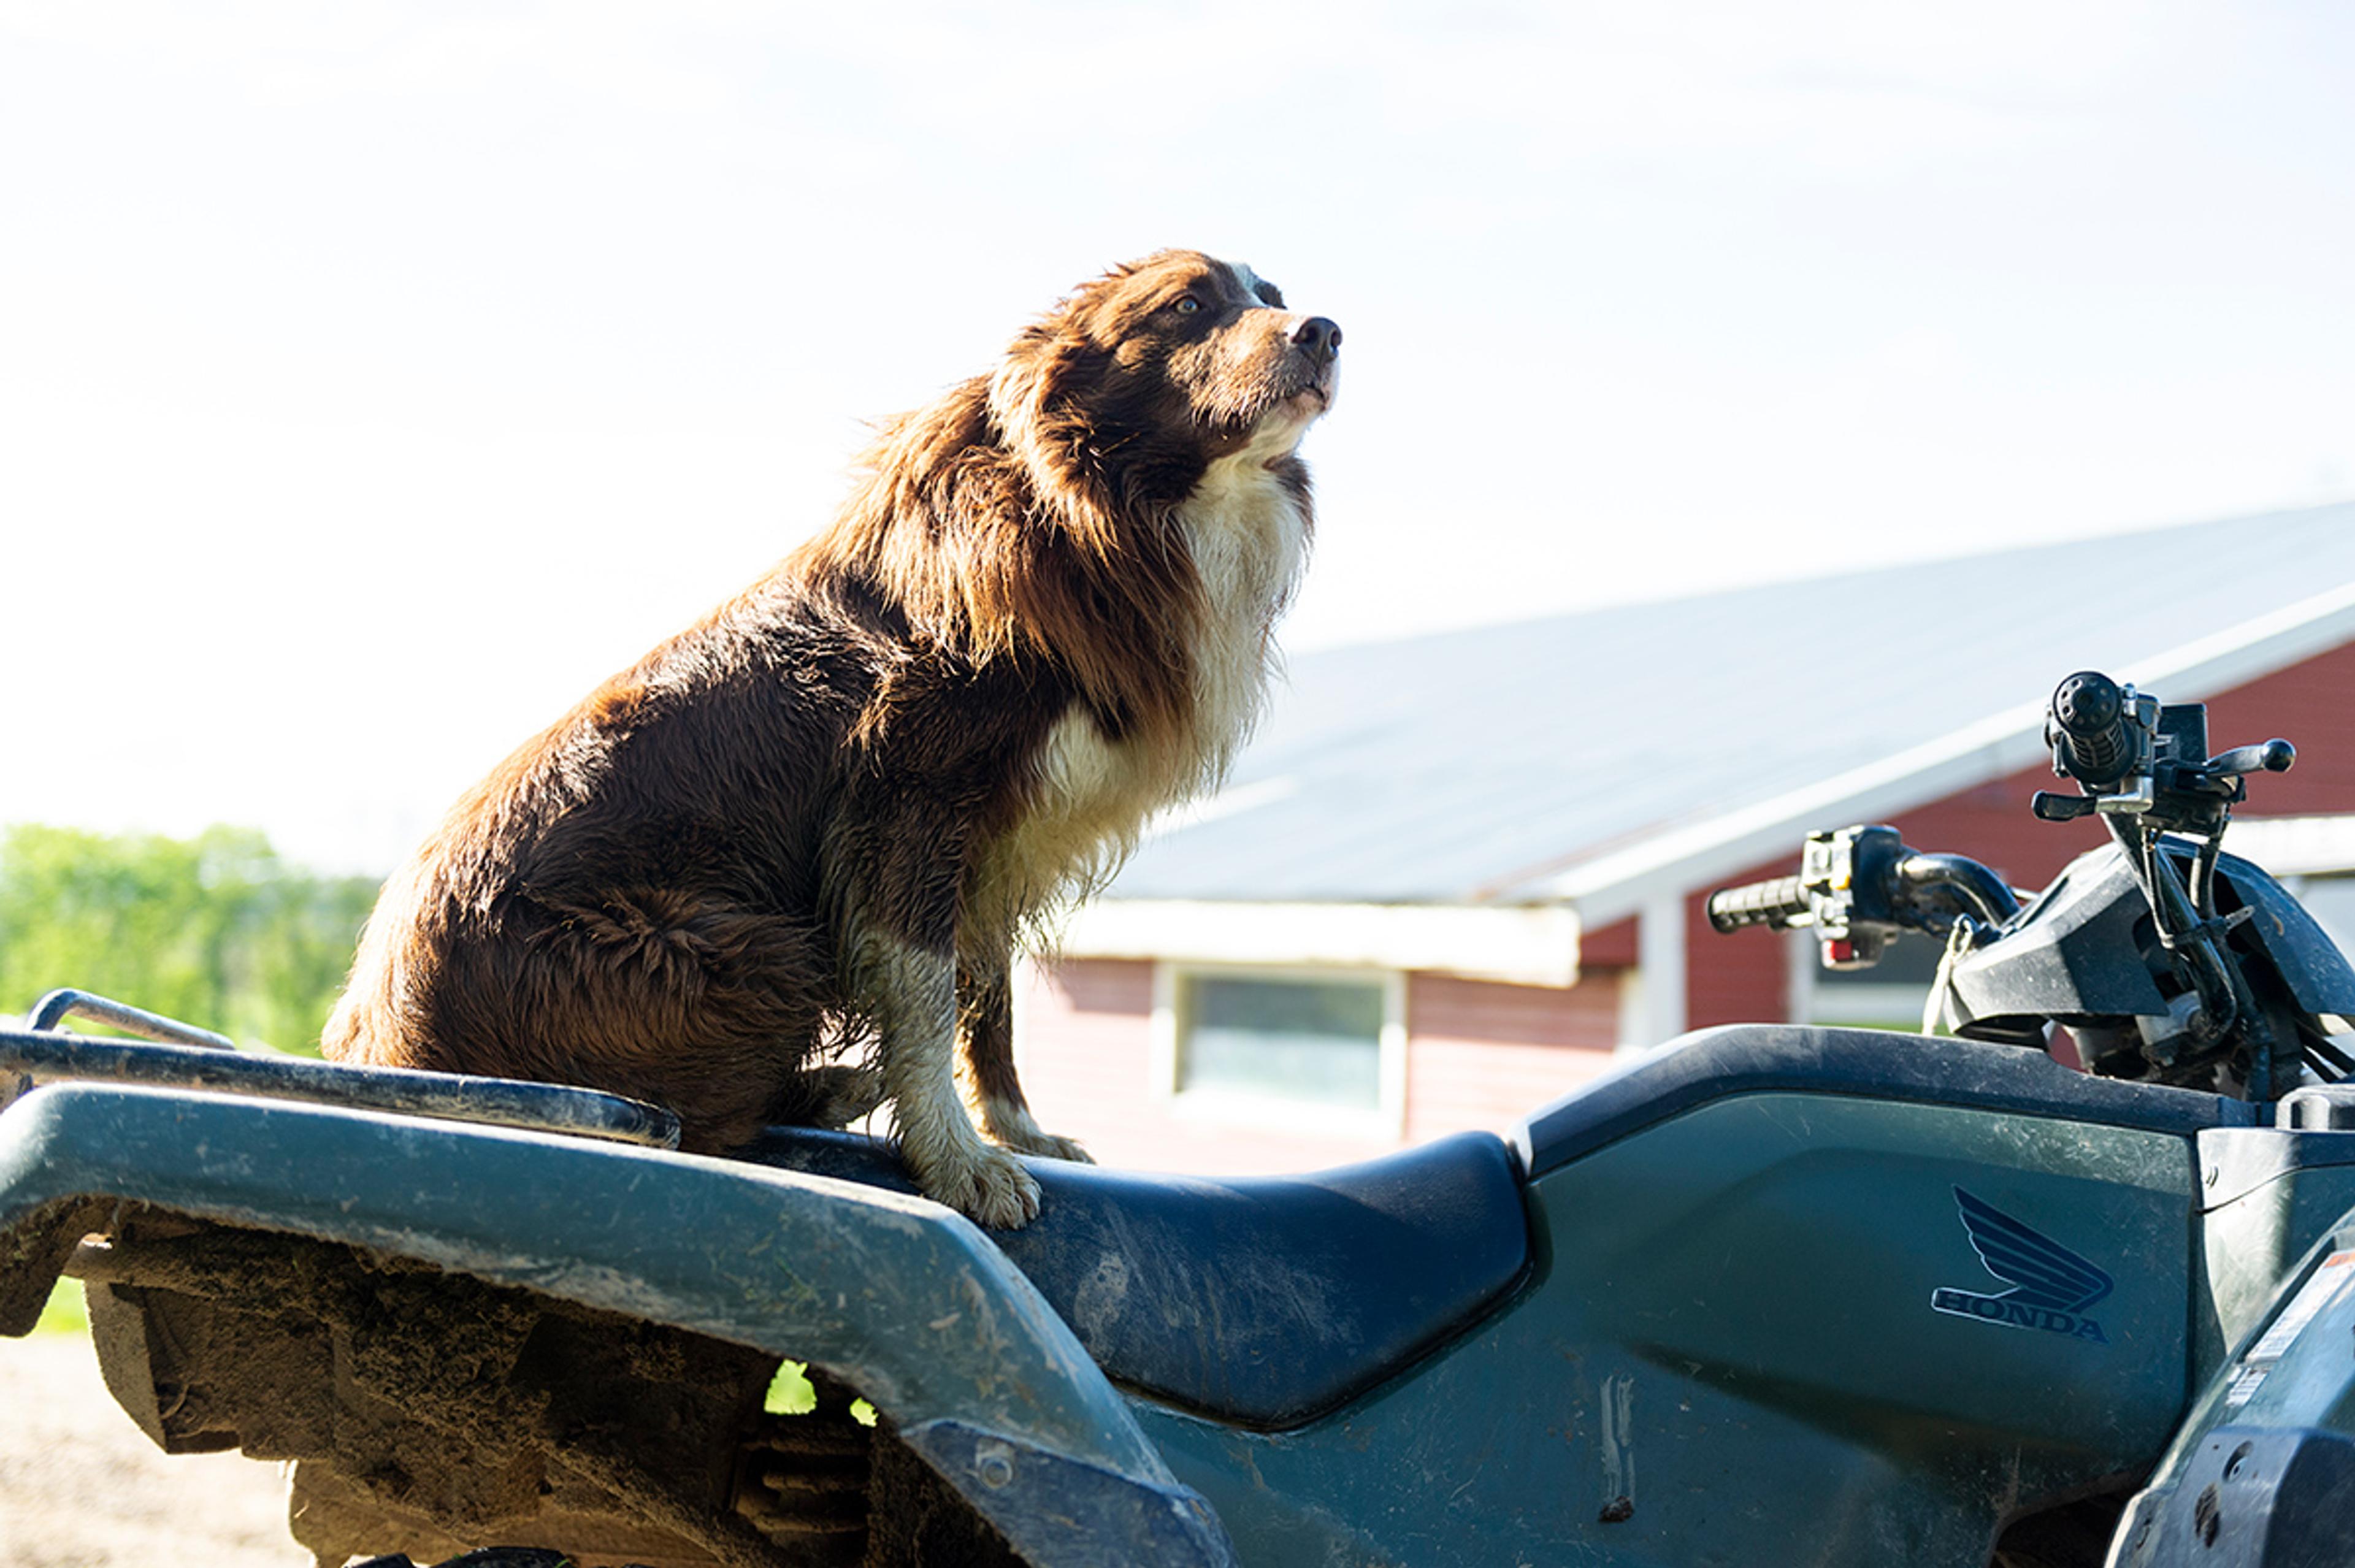 A border collie dog sits on a four-wheeler in a heroic pose with sun highlighting its fur.